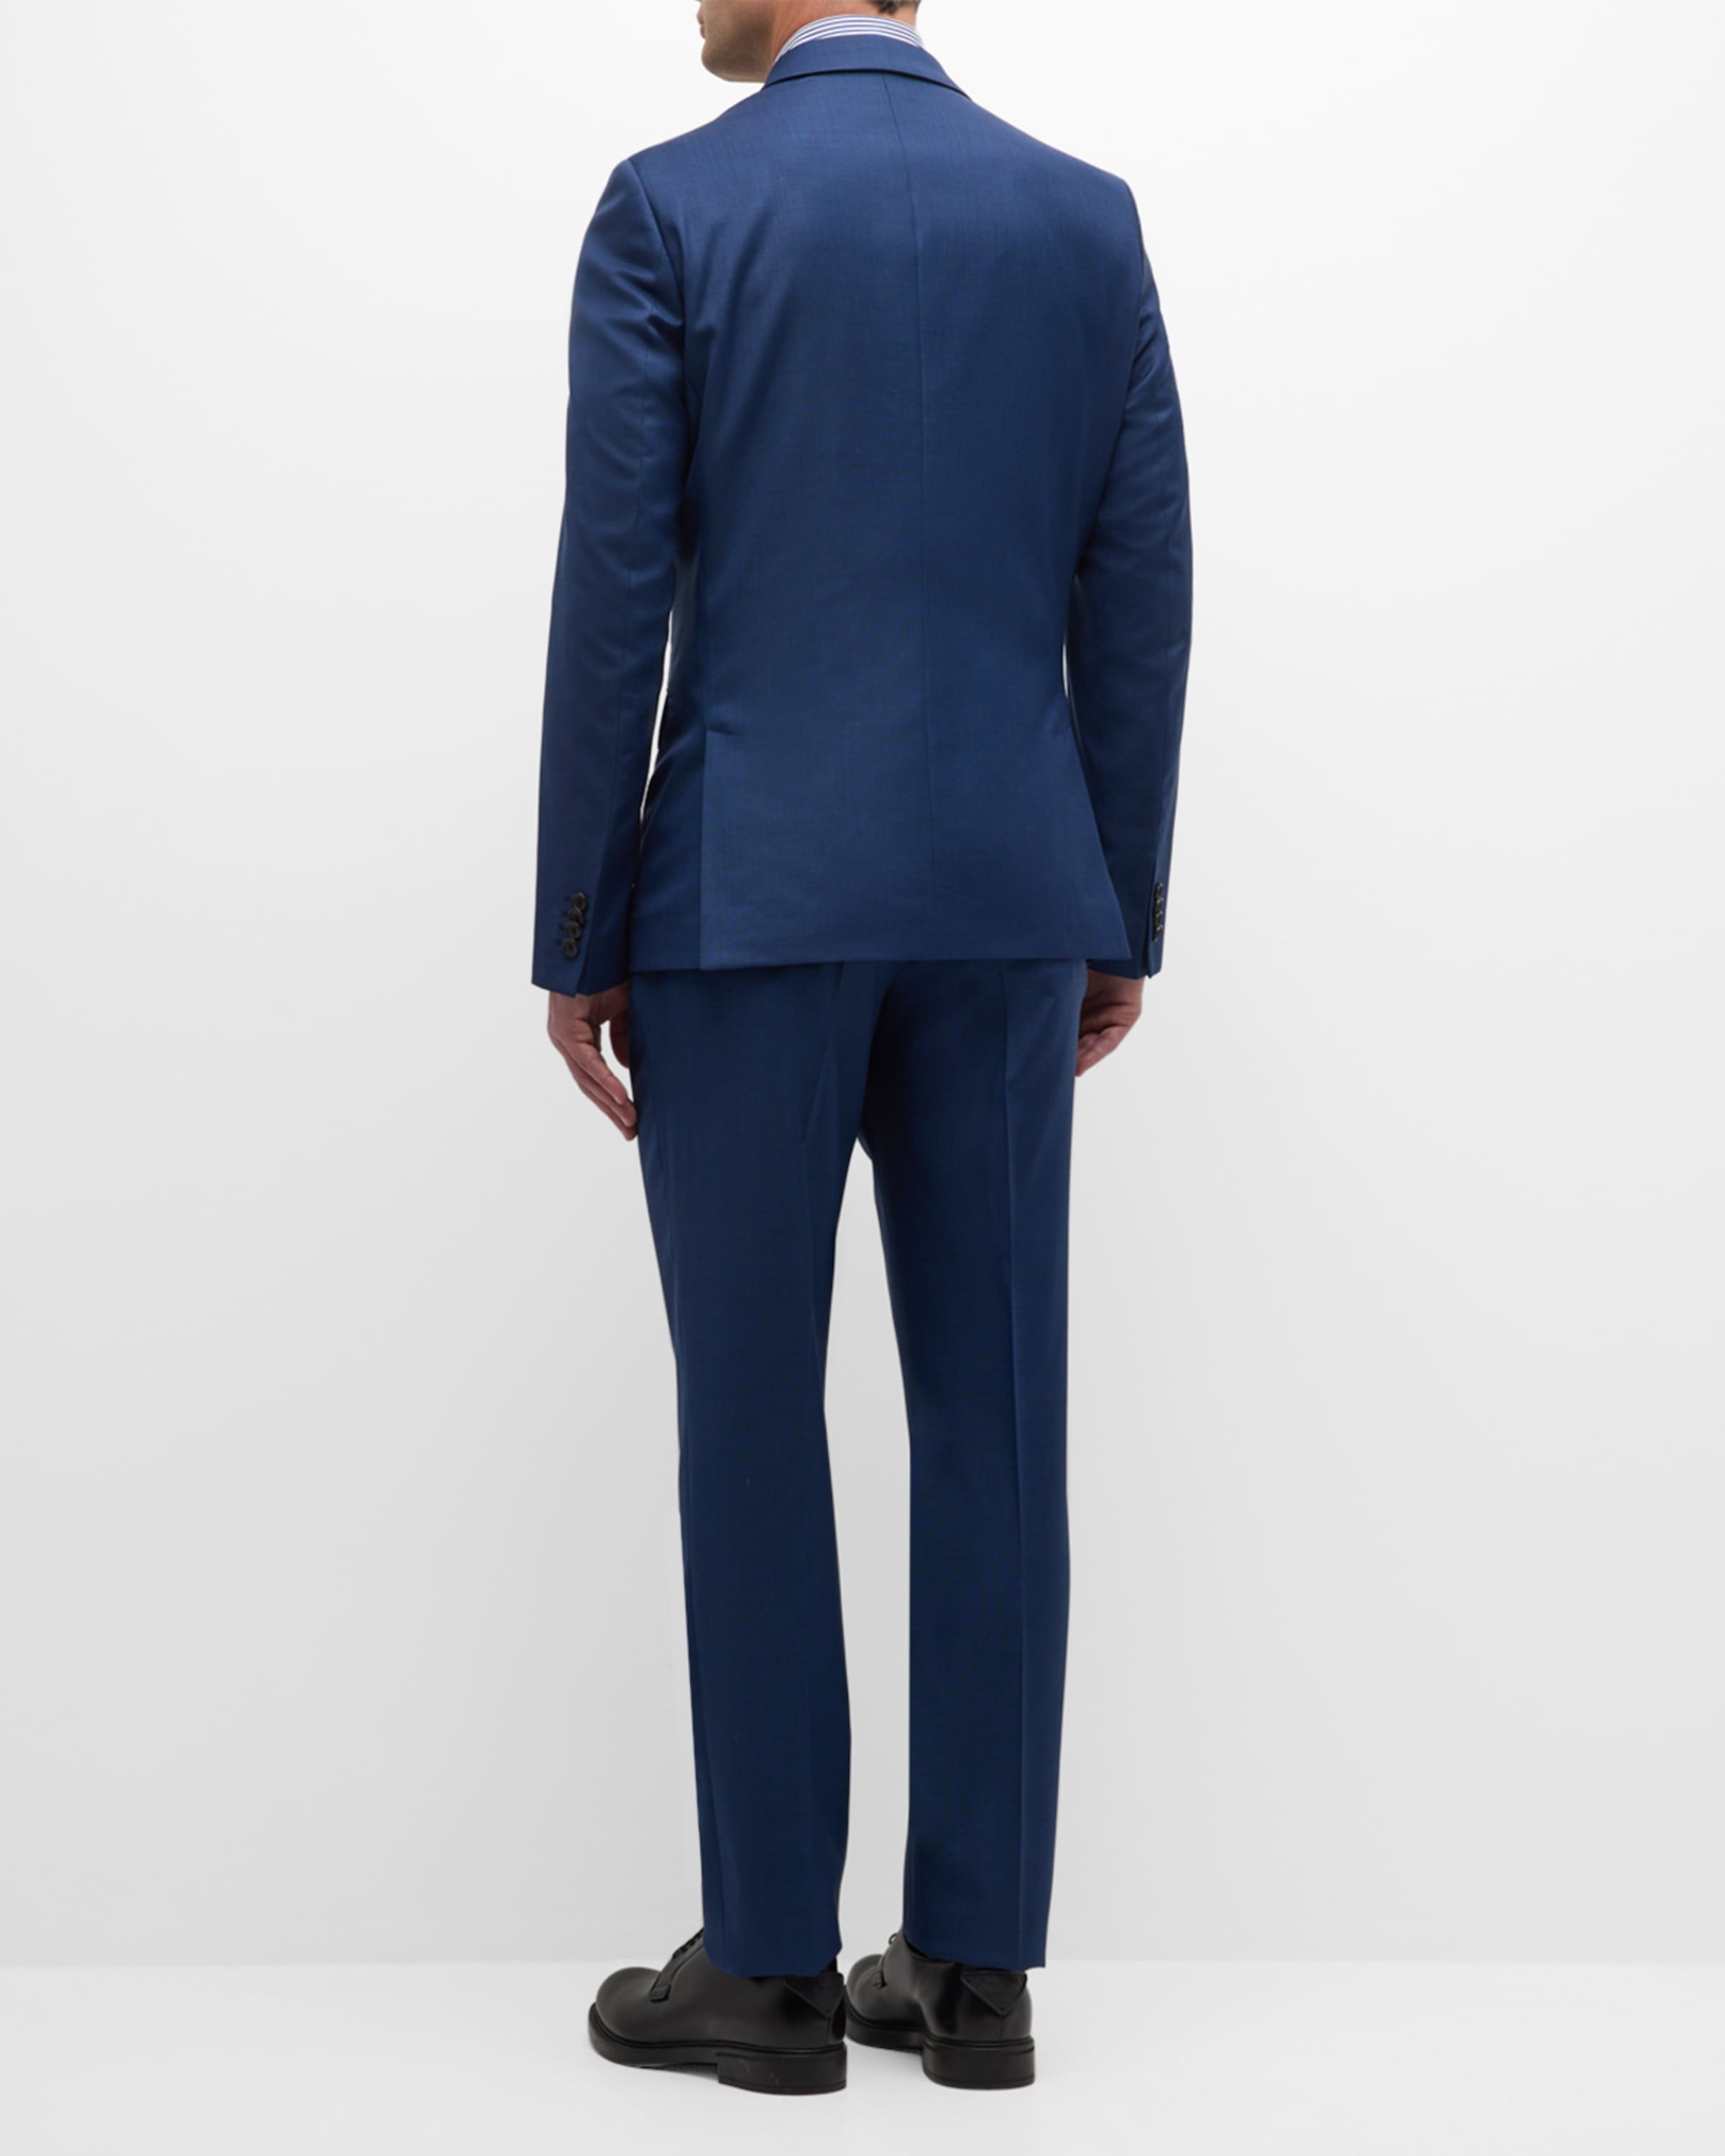 Men's Tailored Fit Wool Two-Button Suit - 4